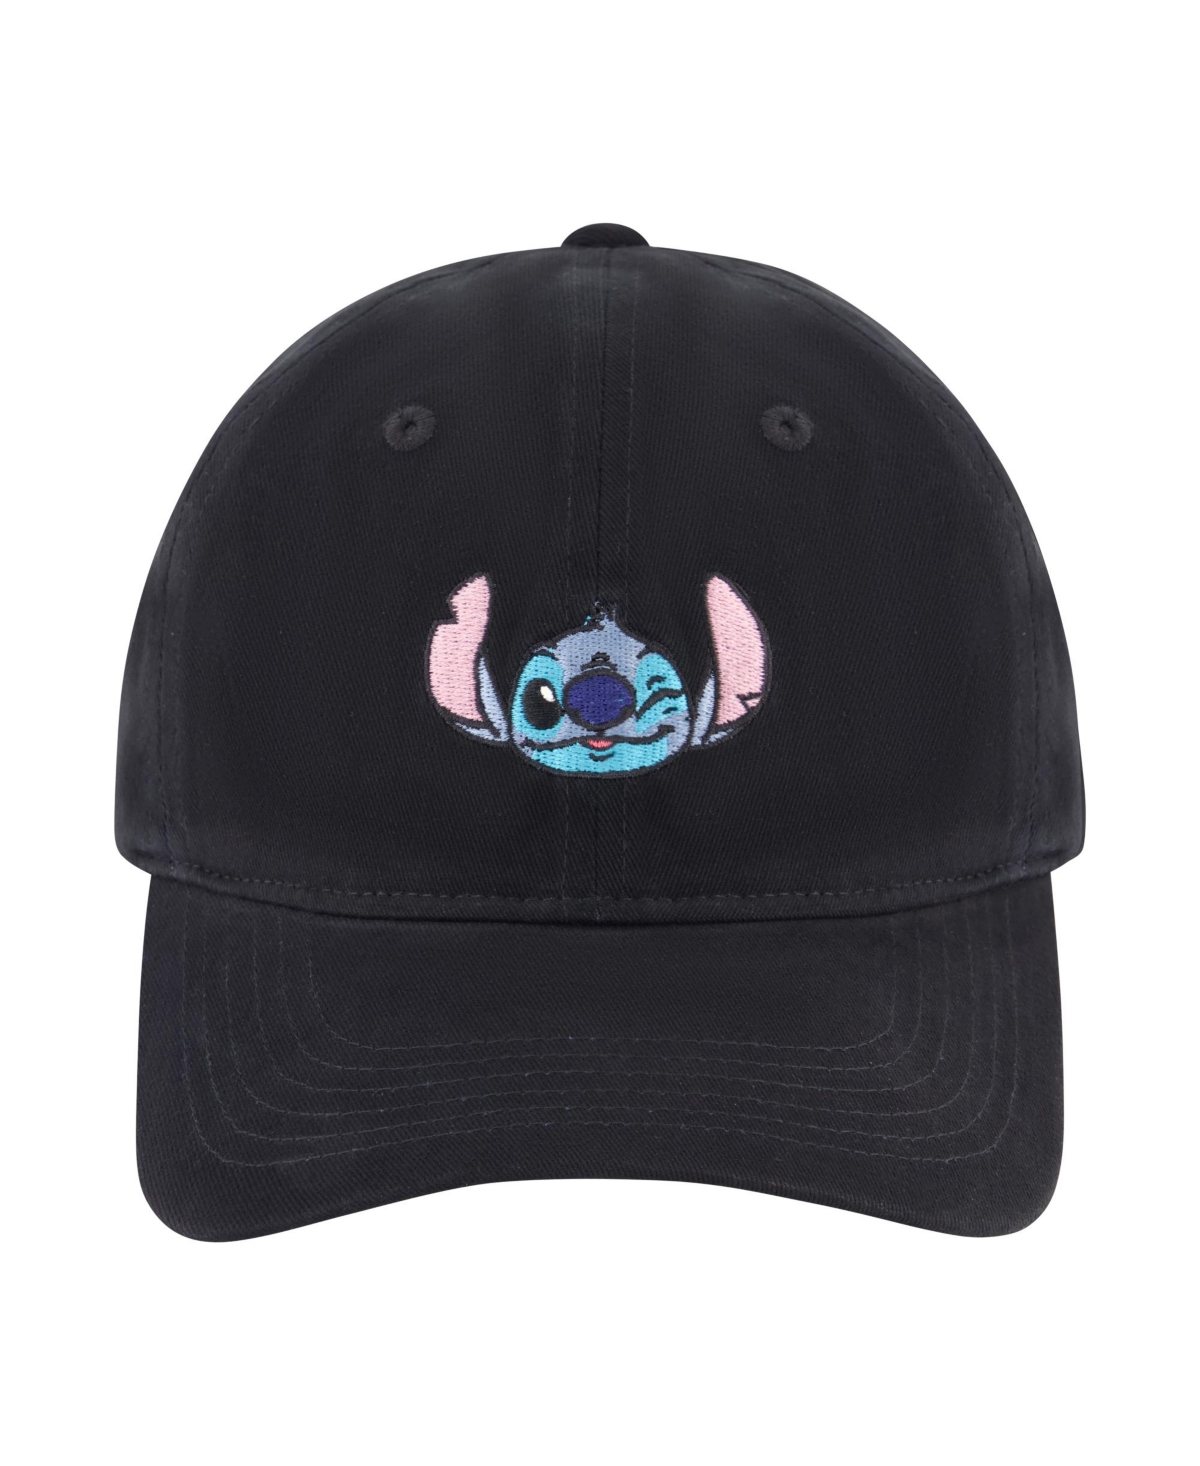 Stitch Winky Face Embroidery Dad Cap - Black